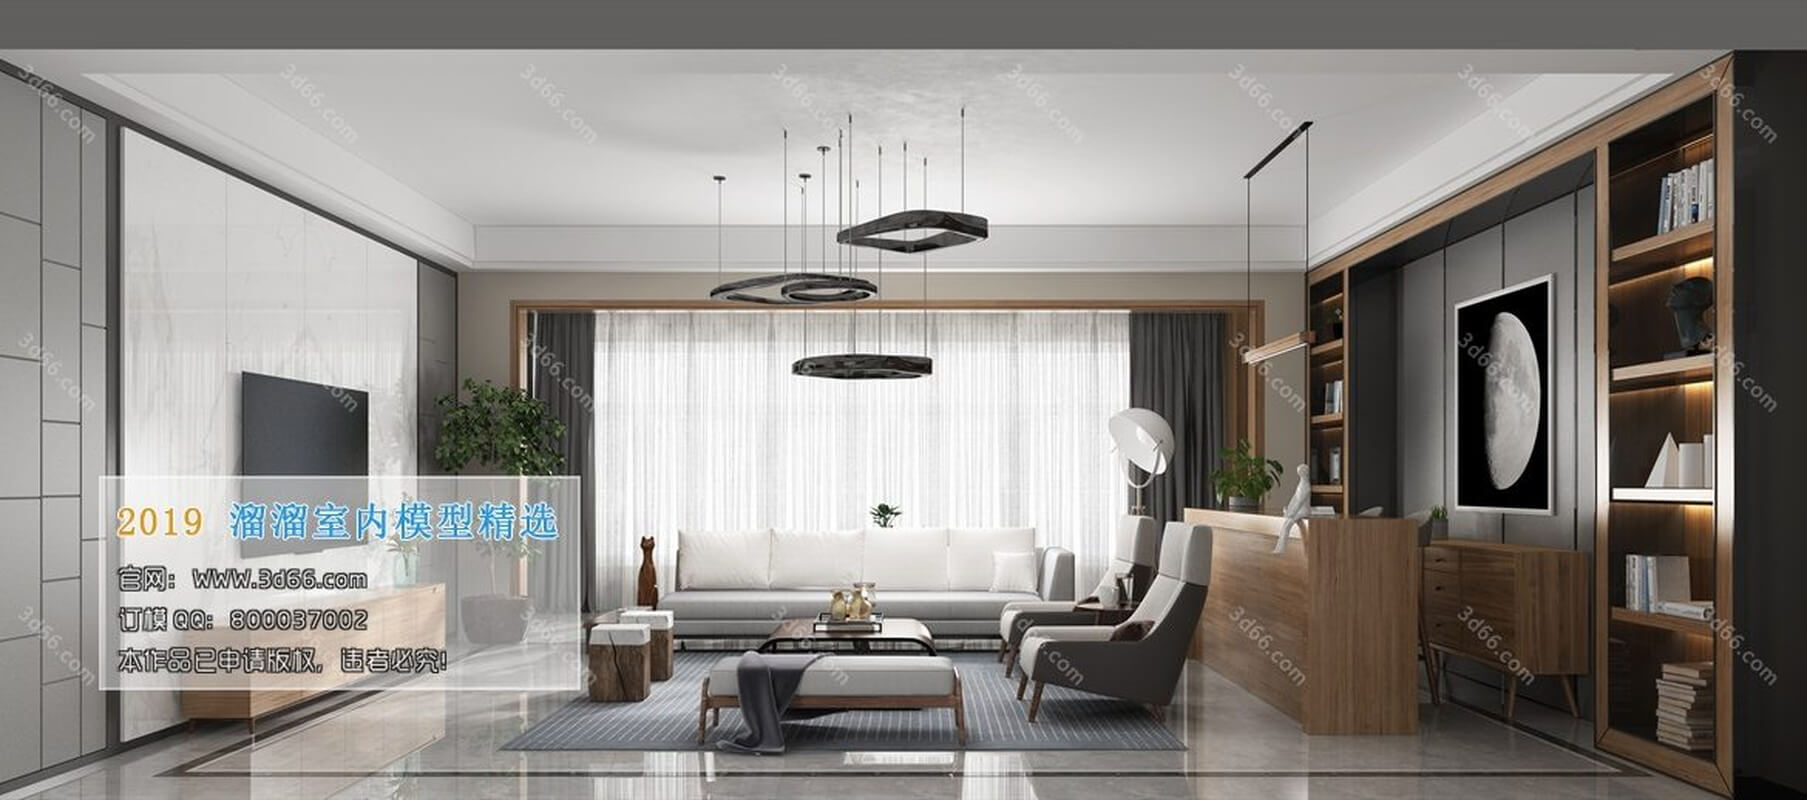 3D66 Living Room Interior 2019 Style (01)